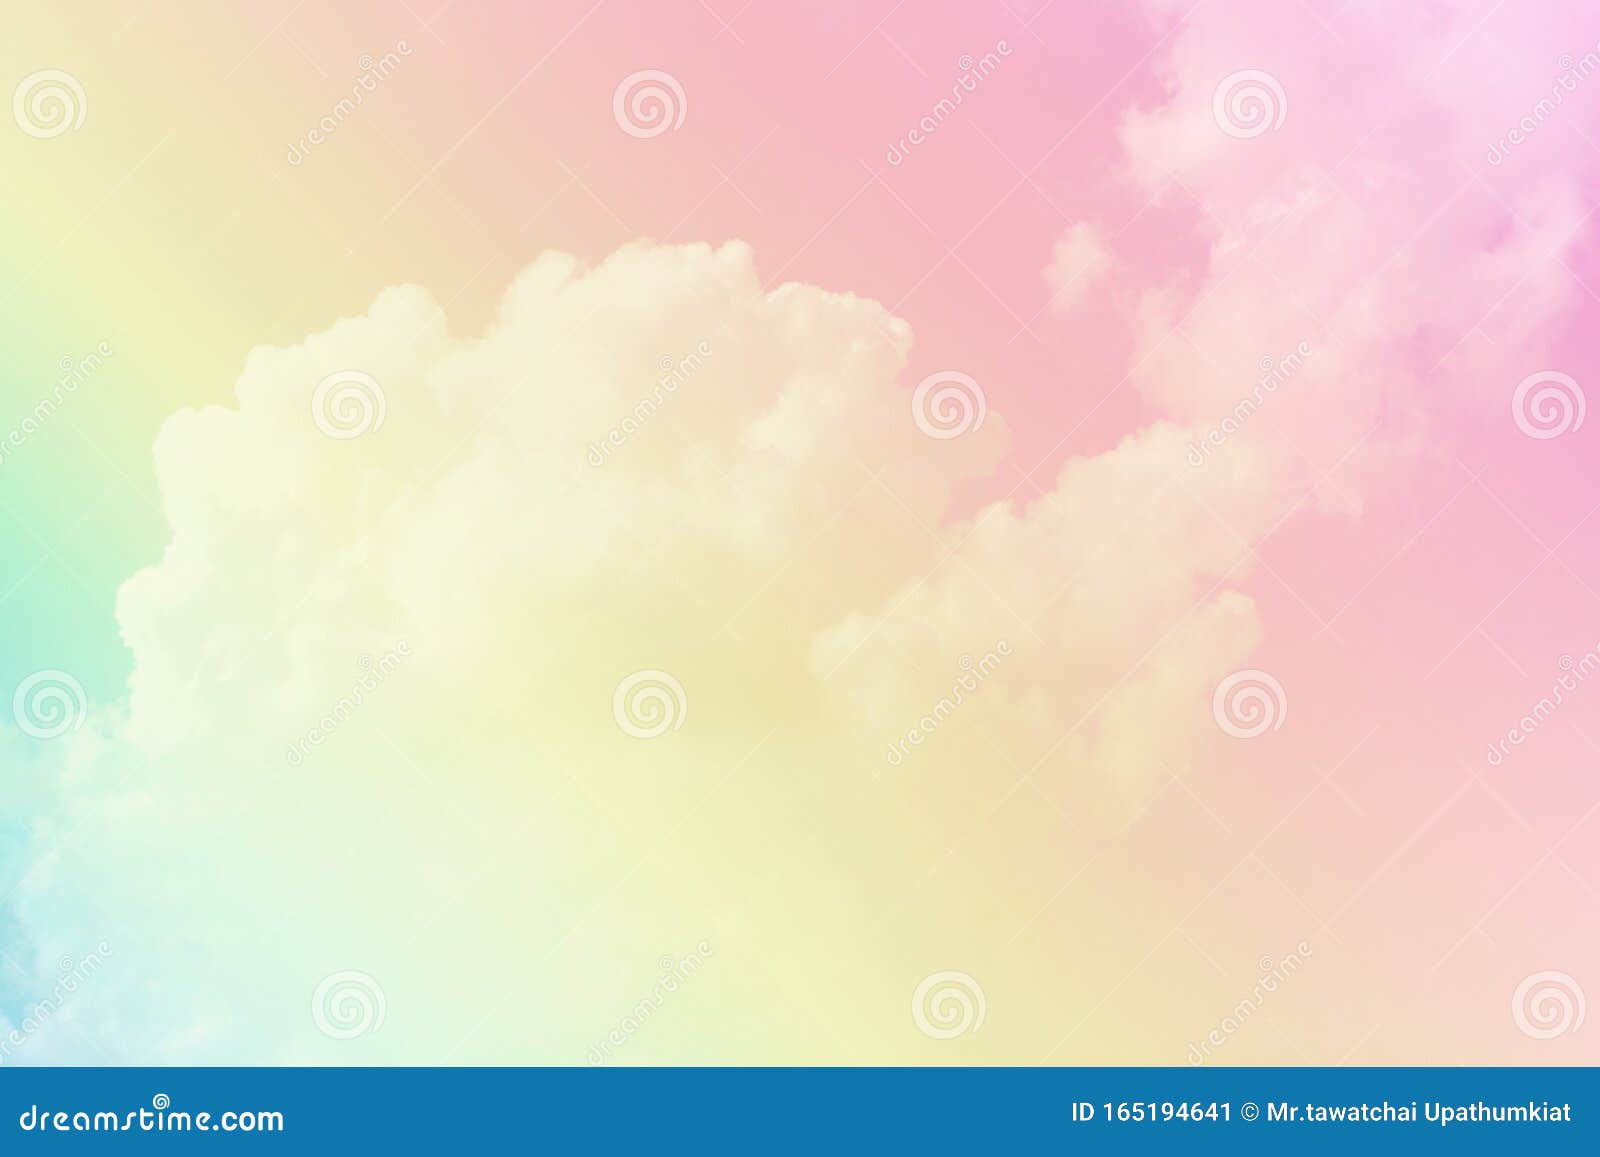 Abstract Fantasy Background Sweet Colorful Summer Sky And Clouds With Pastel Tone Stock Image Image Of Journey Cloud